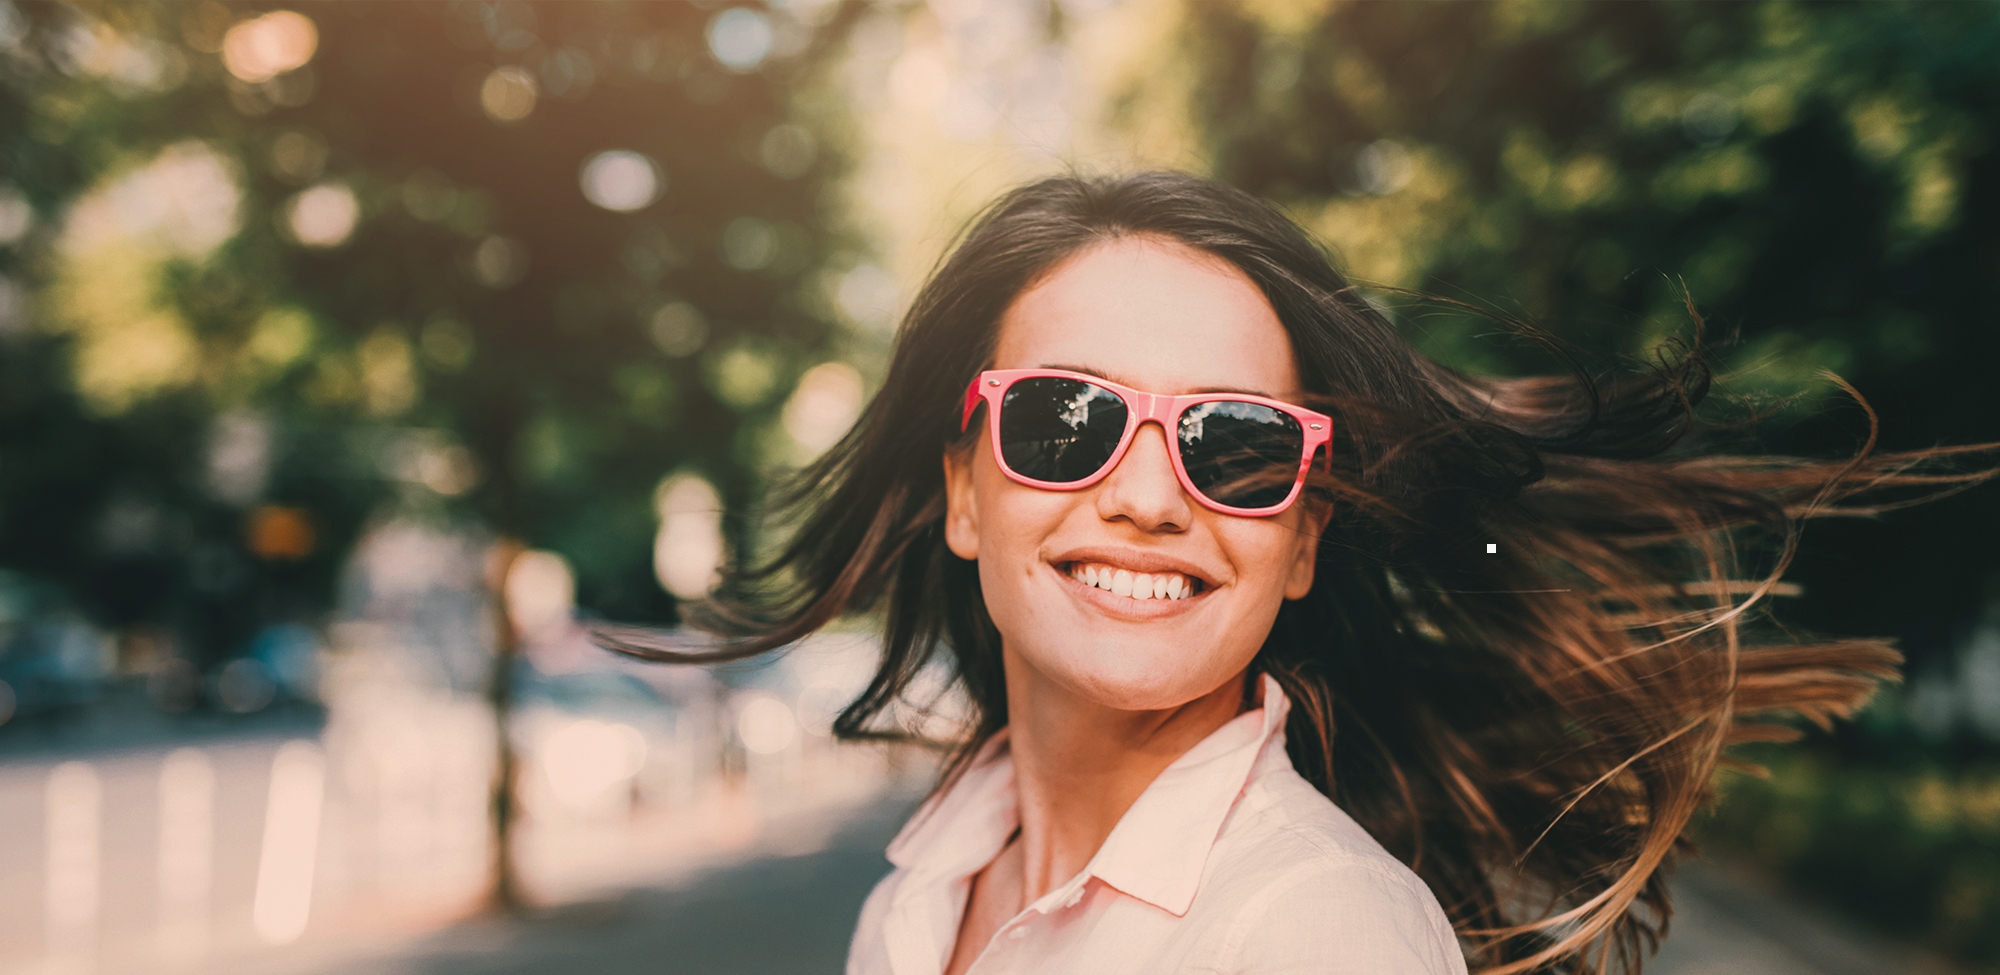 young woman smiling while wearing sunglasses